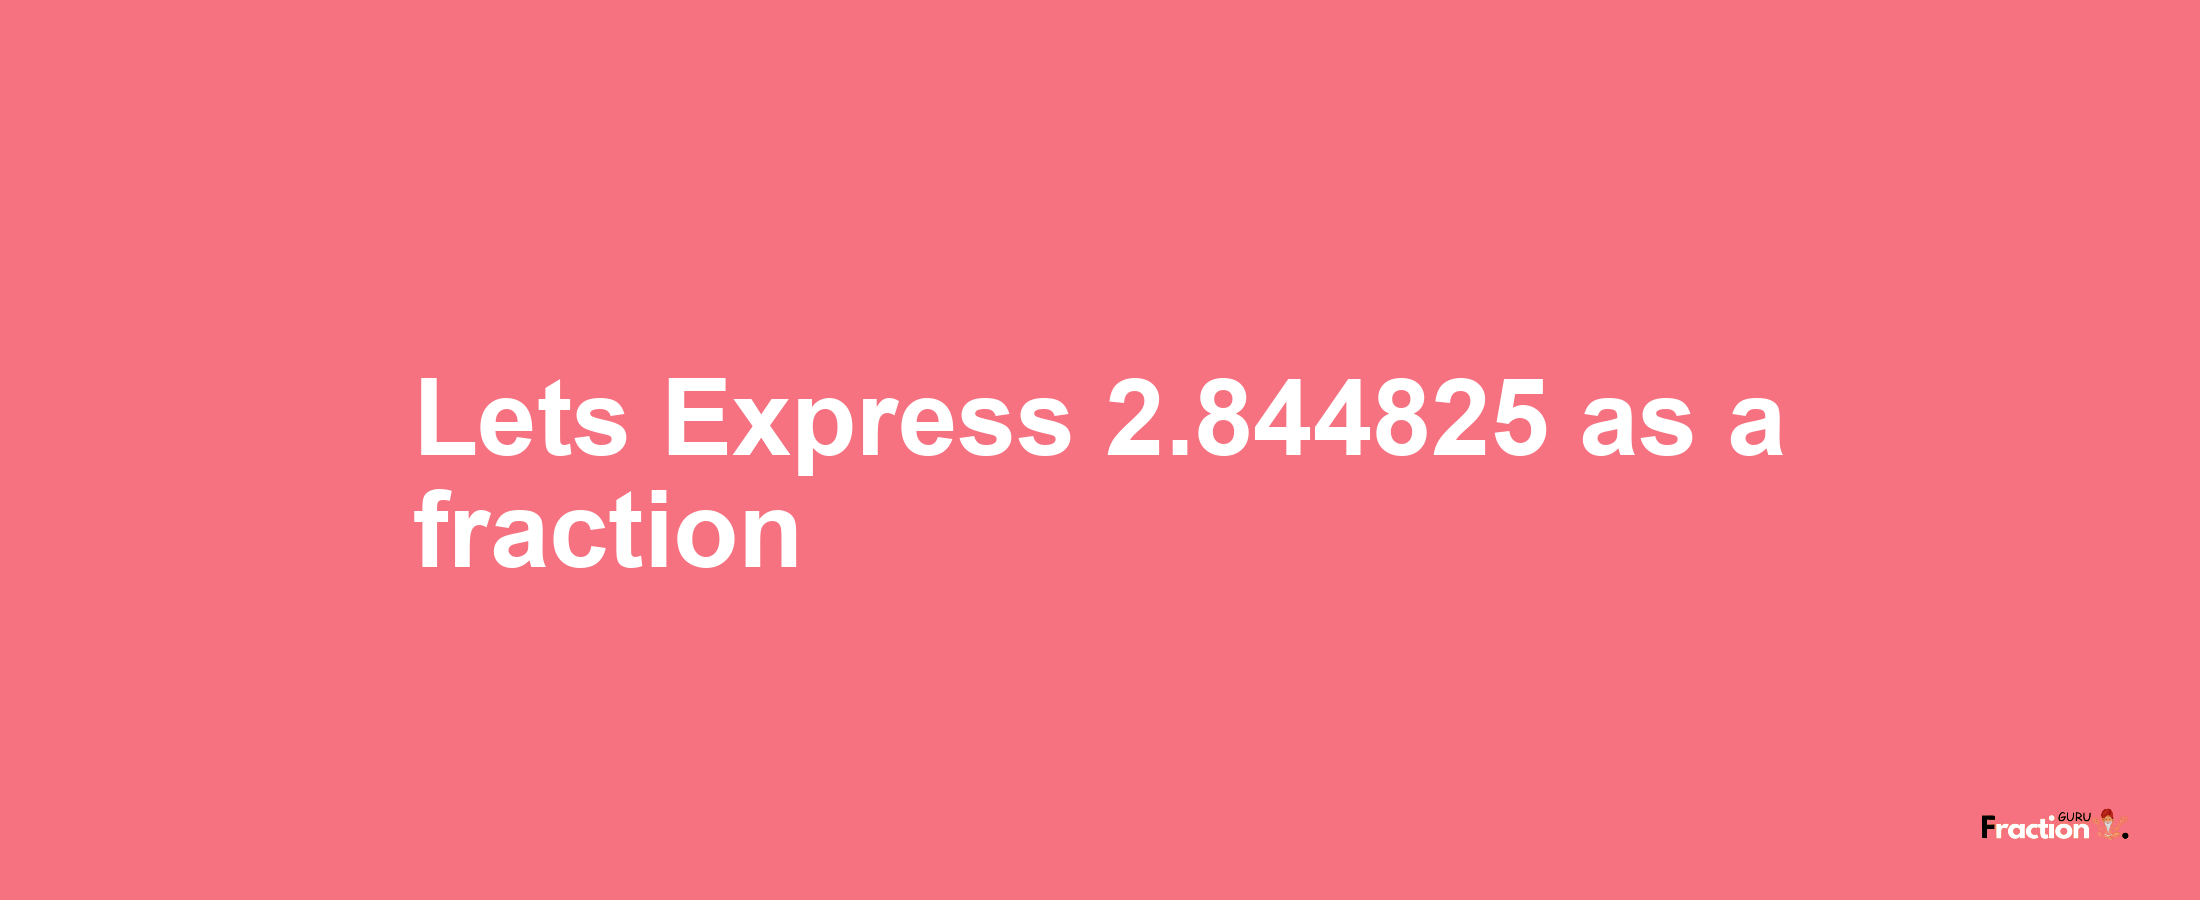 Lets Express 2.844825 as afraction